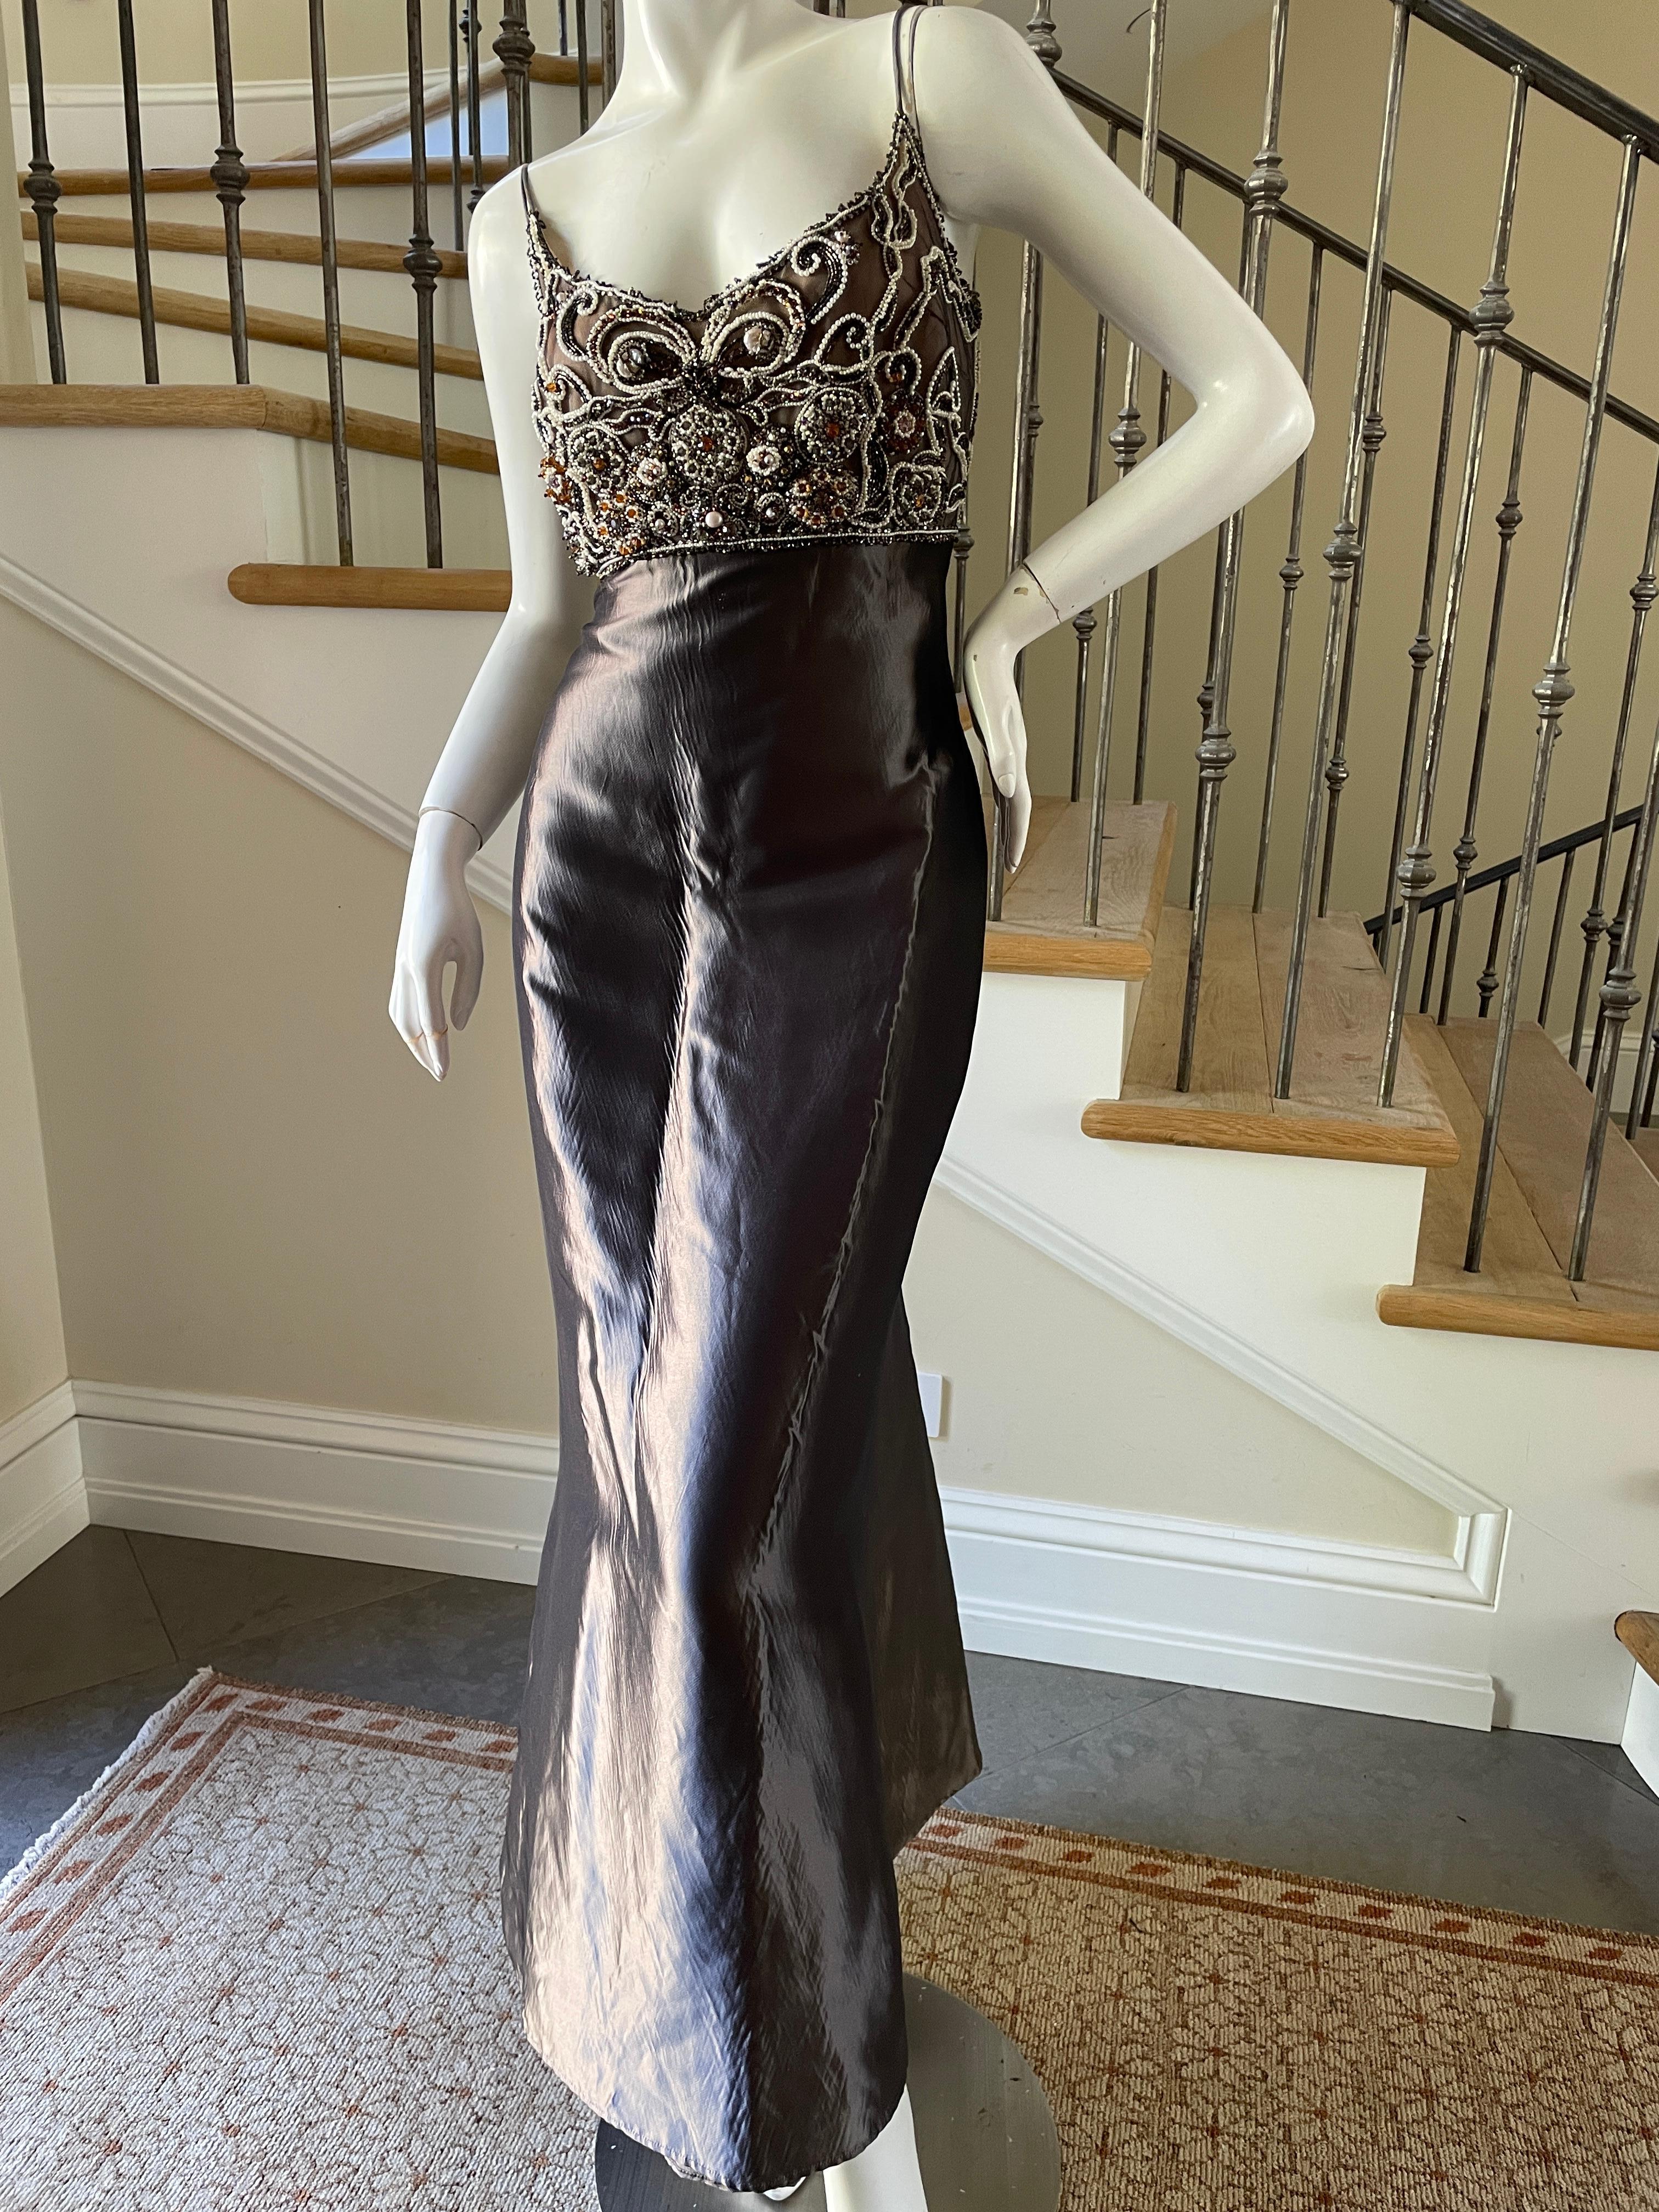 Badgley Mischka Metallic Vintage Evening Dress with Embellished Bust In Excellent Condition For Sale In Cloverdale, CA